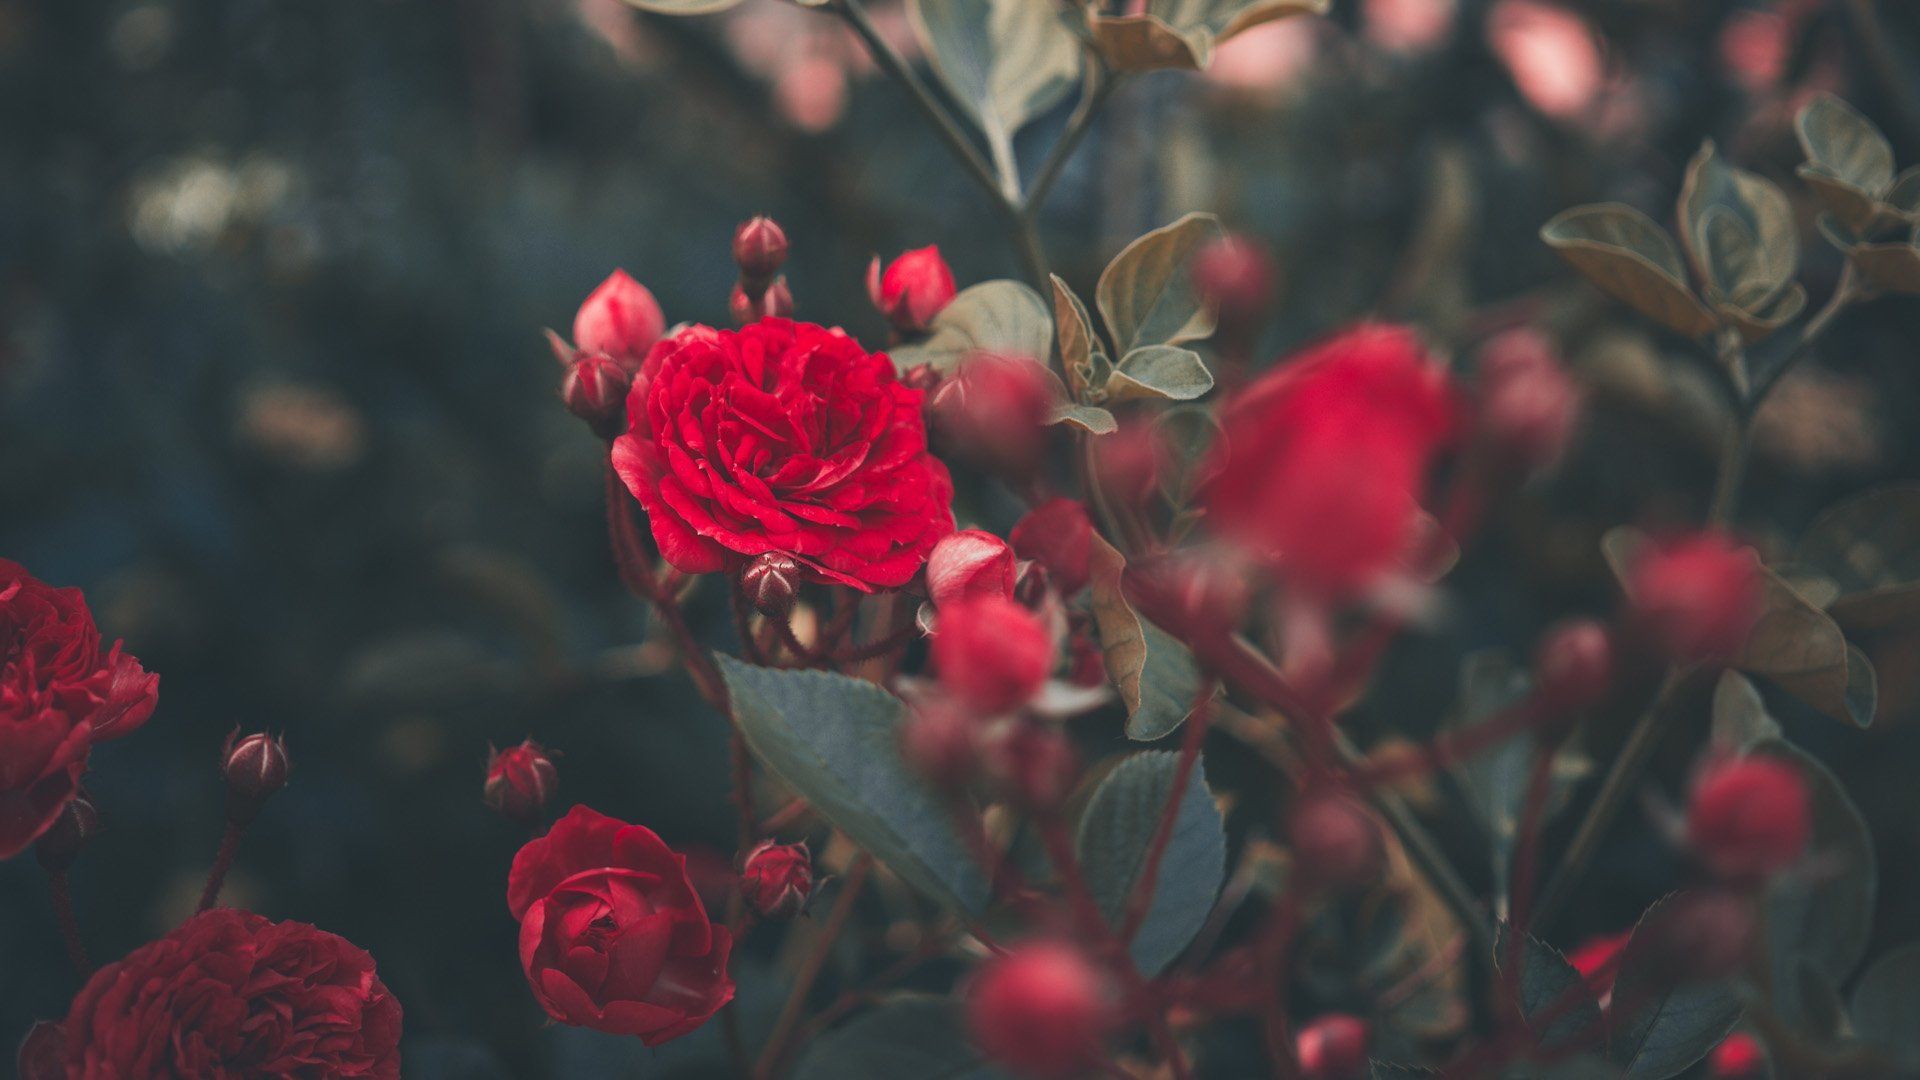 Aesthetic Rose Wallpaper: Image, Nature Category